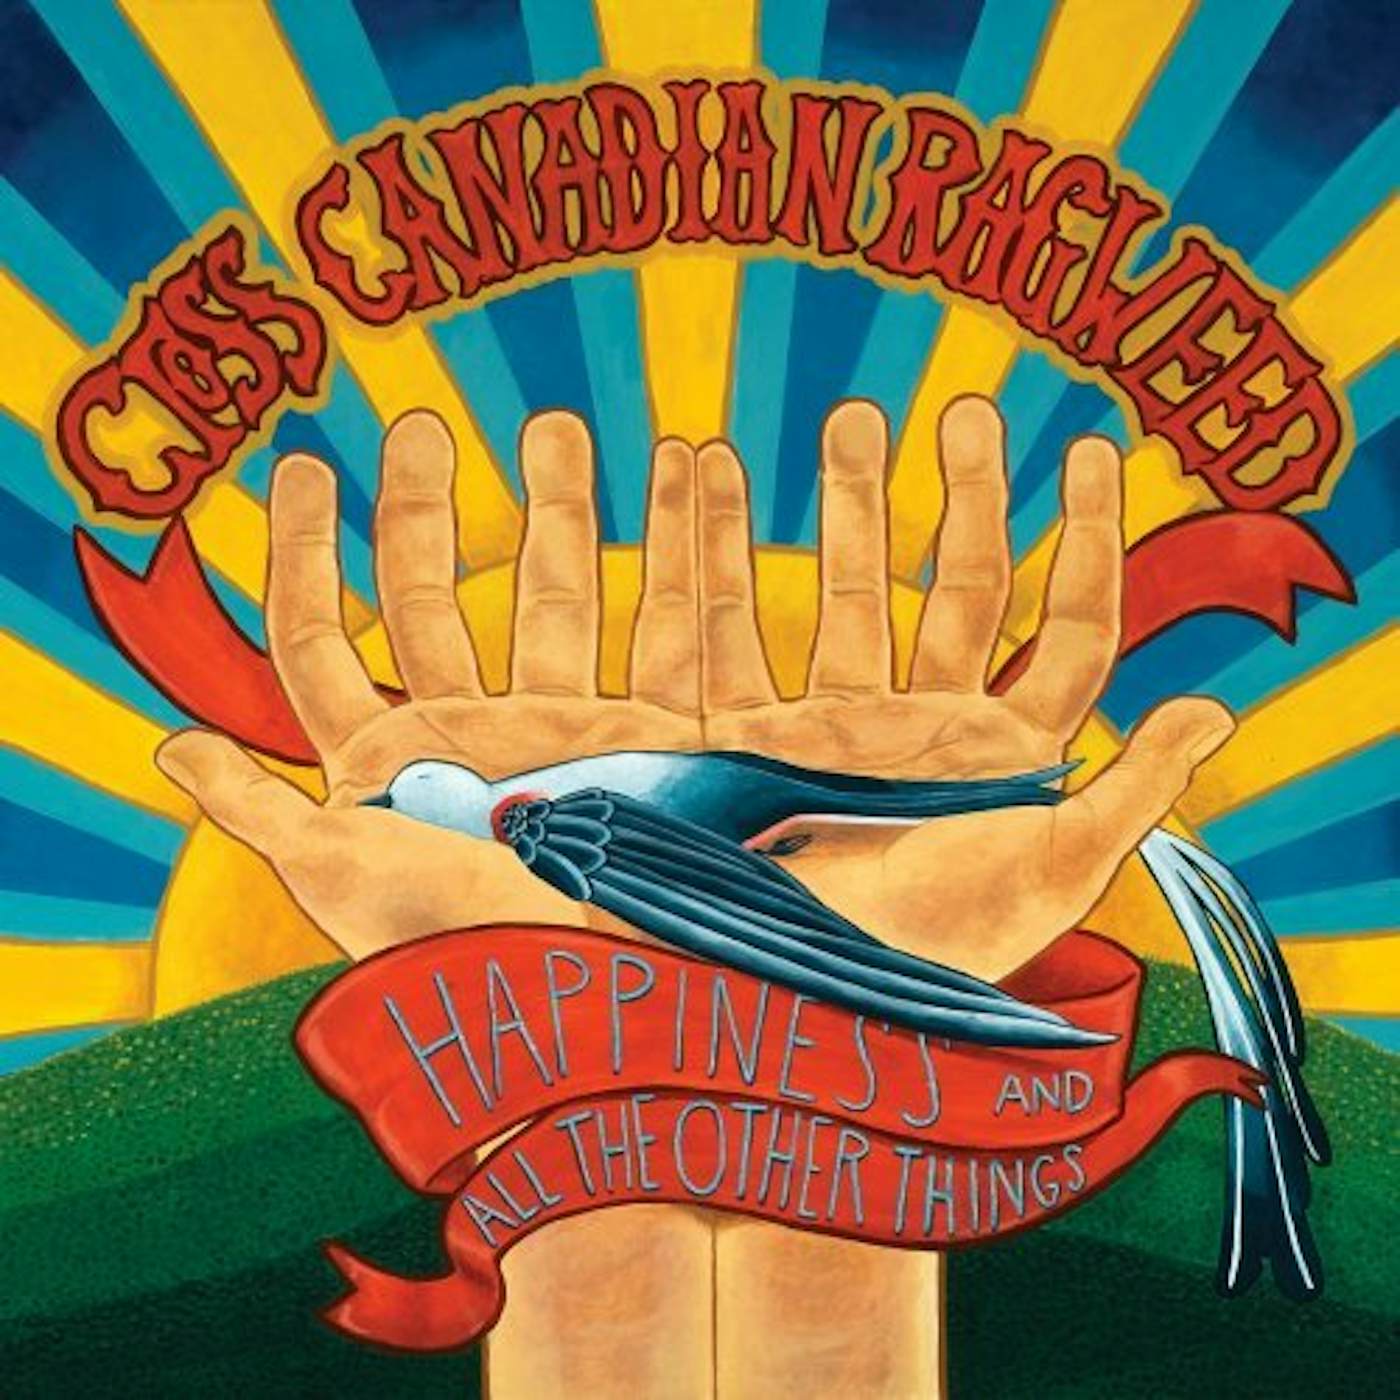 Cross Canadian Ragweed Happiness And All The Other Things Vinyl Record